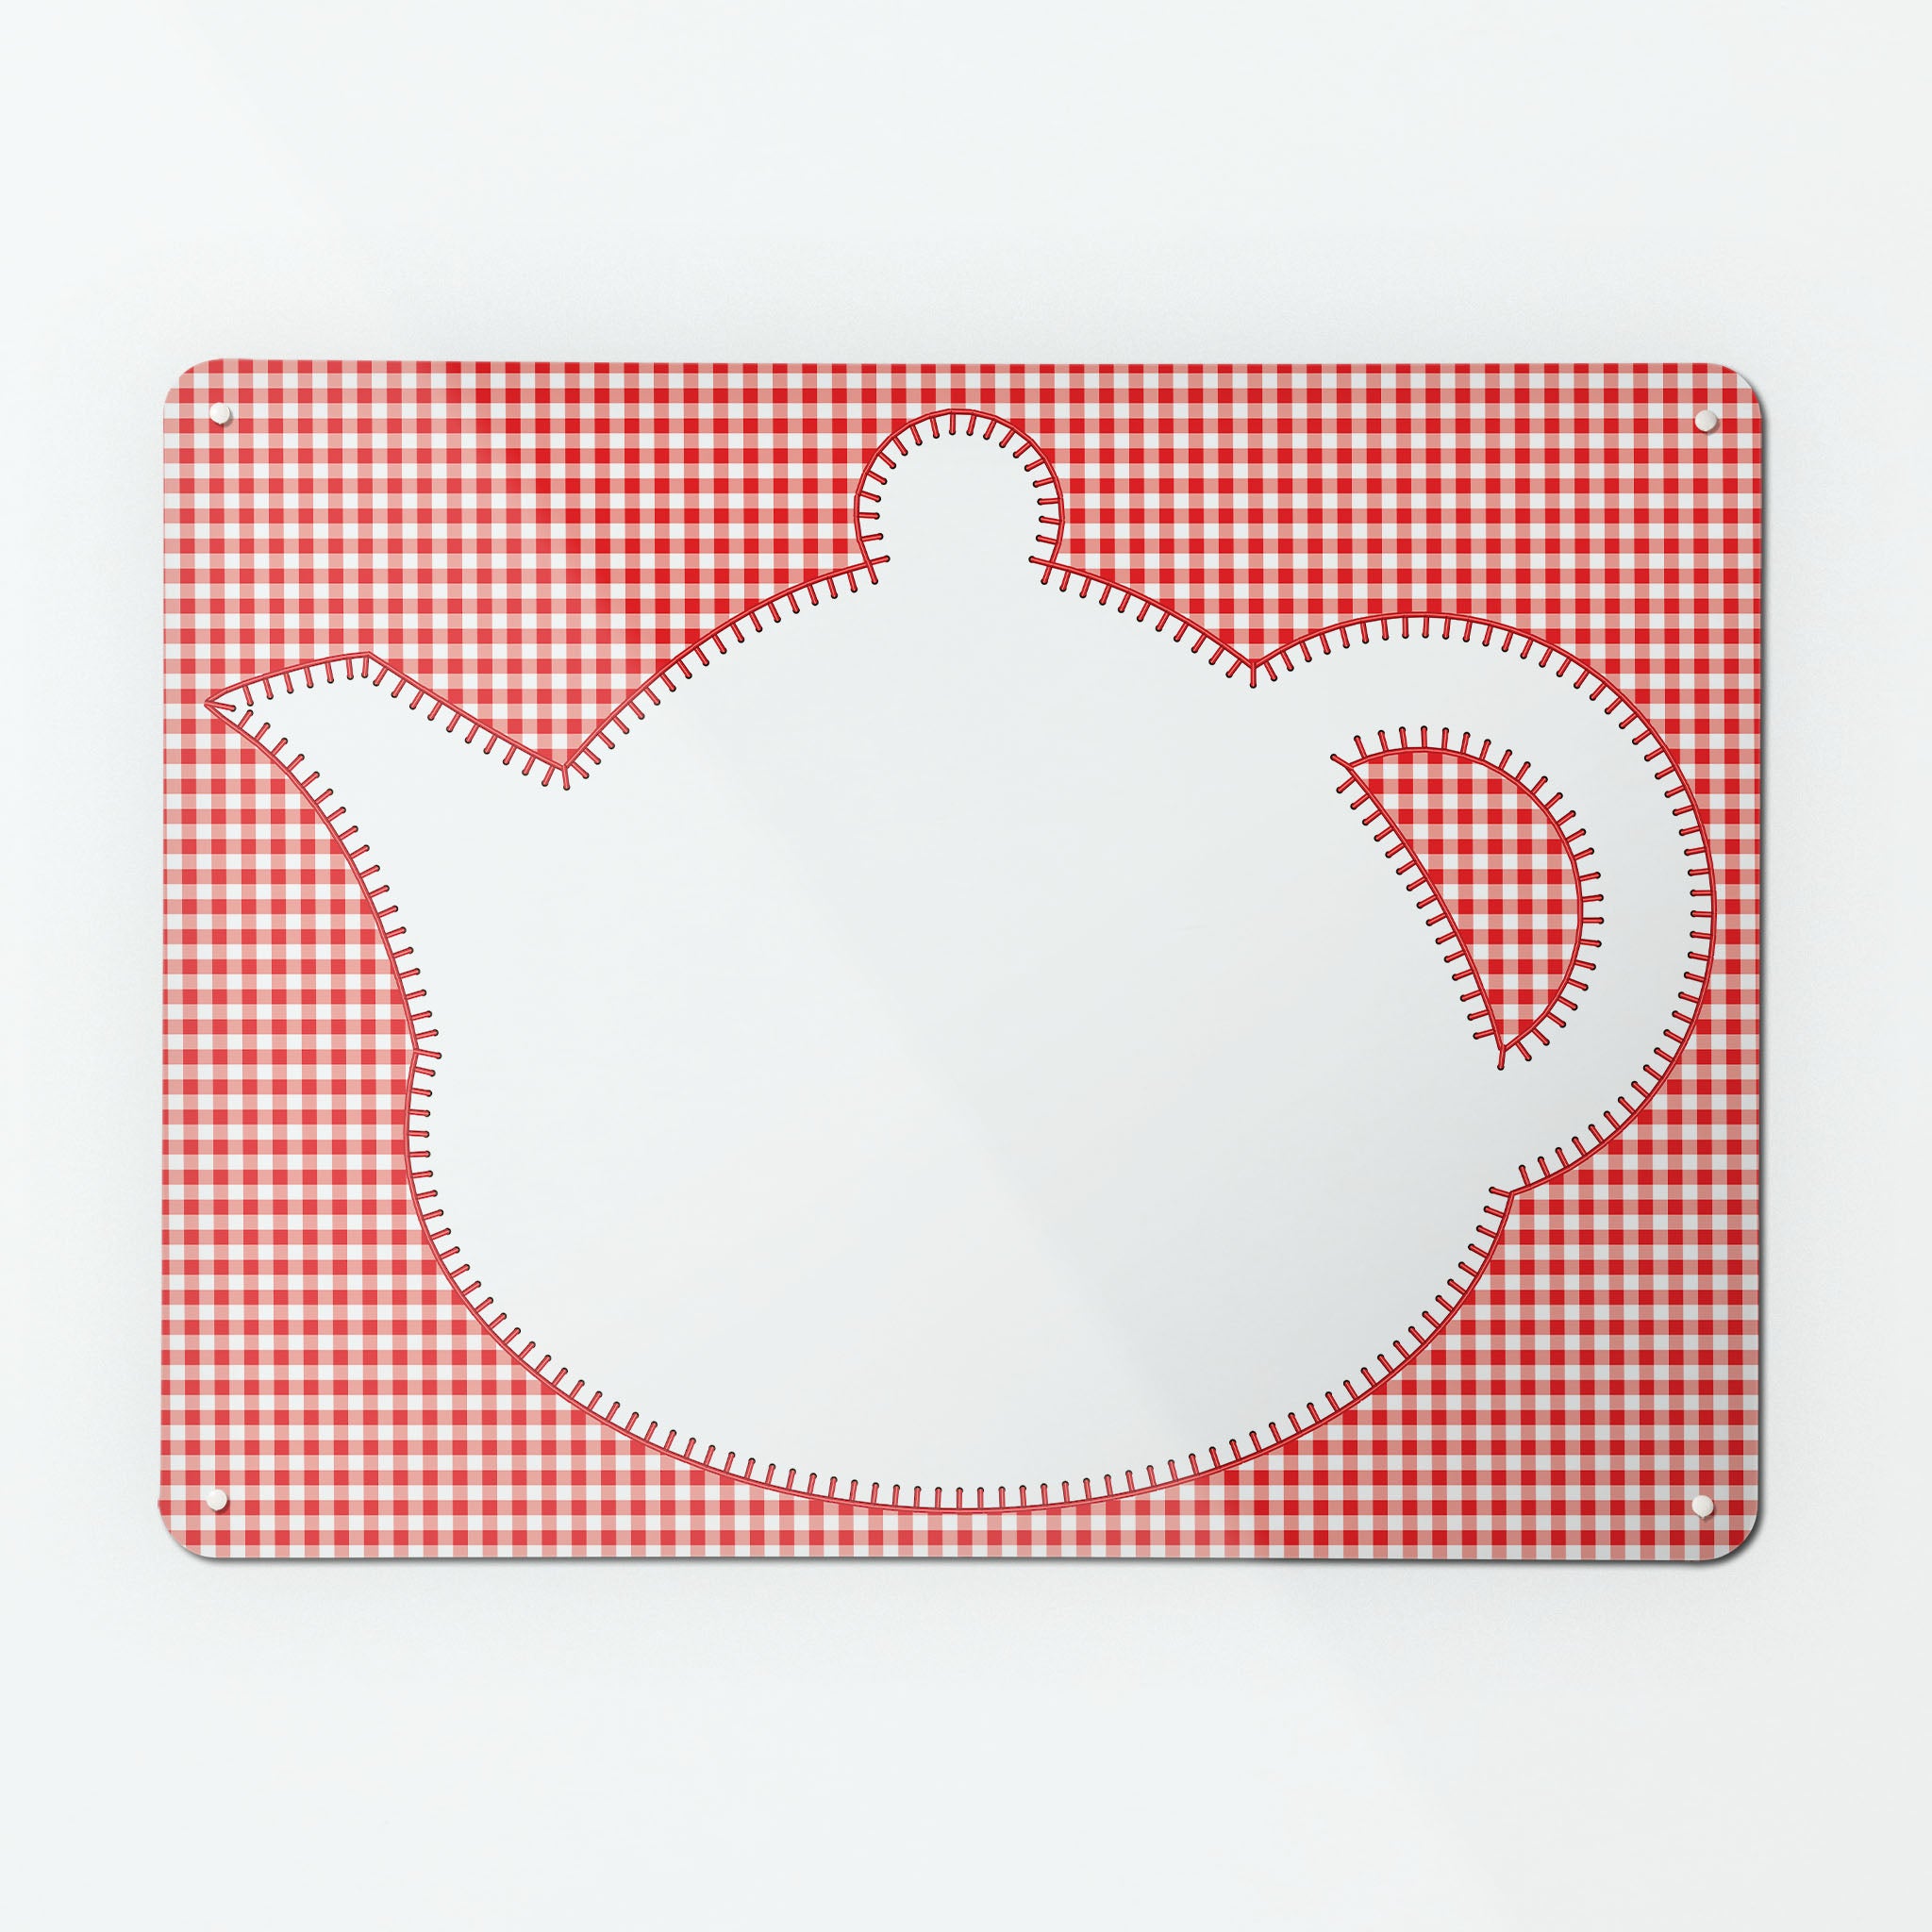 A large magnetic notice board  with an appliqué teapot design in white on a red gingham background